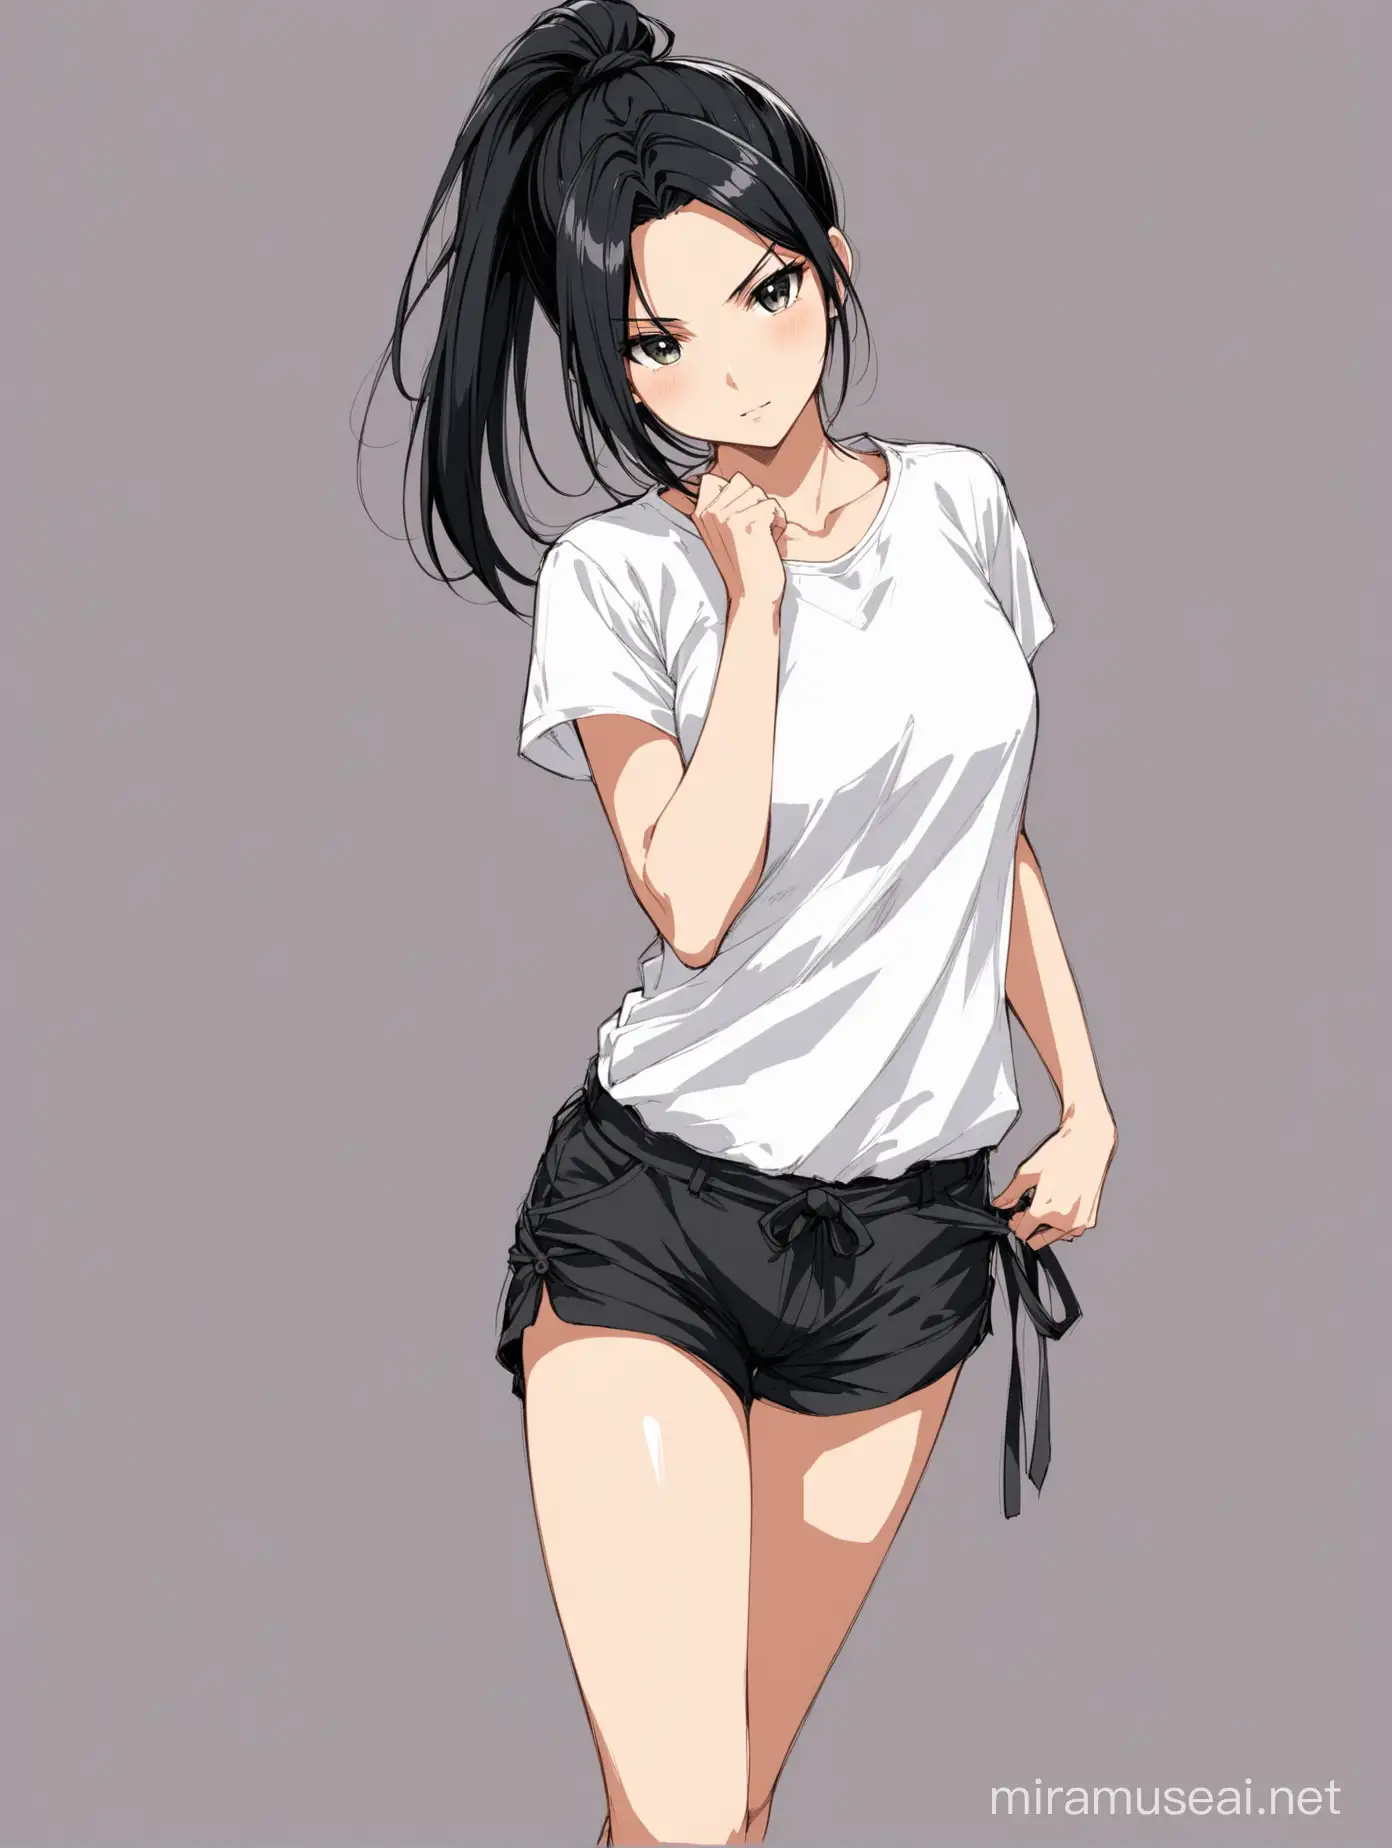 A woman with anime-style black hair tied up in a ponytail, wearing  shorts and white shirt.